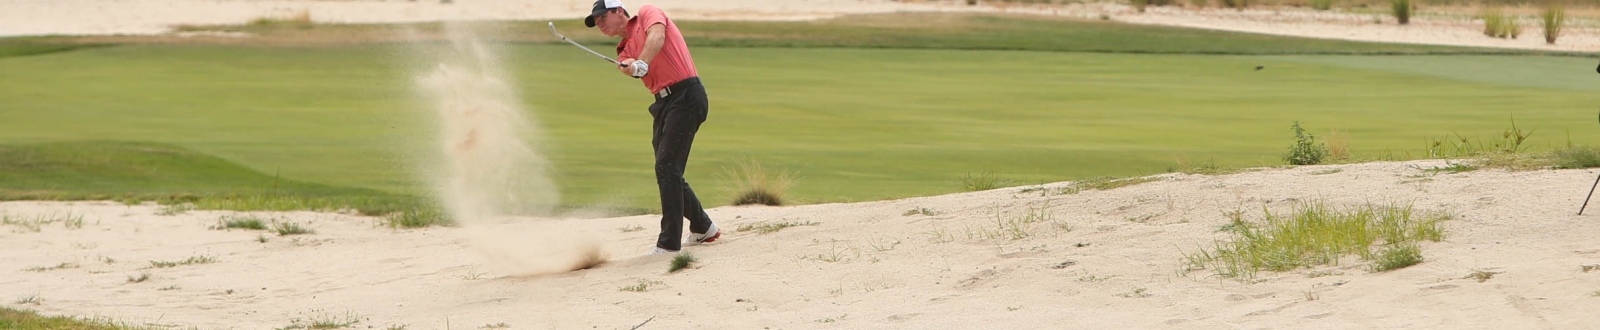 Golfer hitting out of sand trap